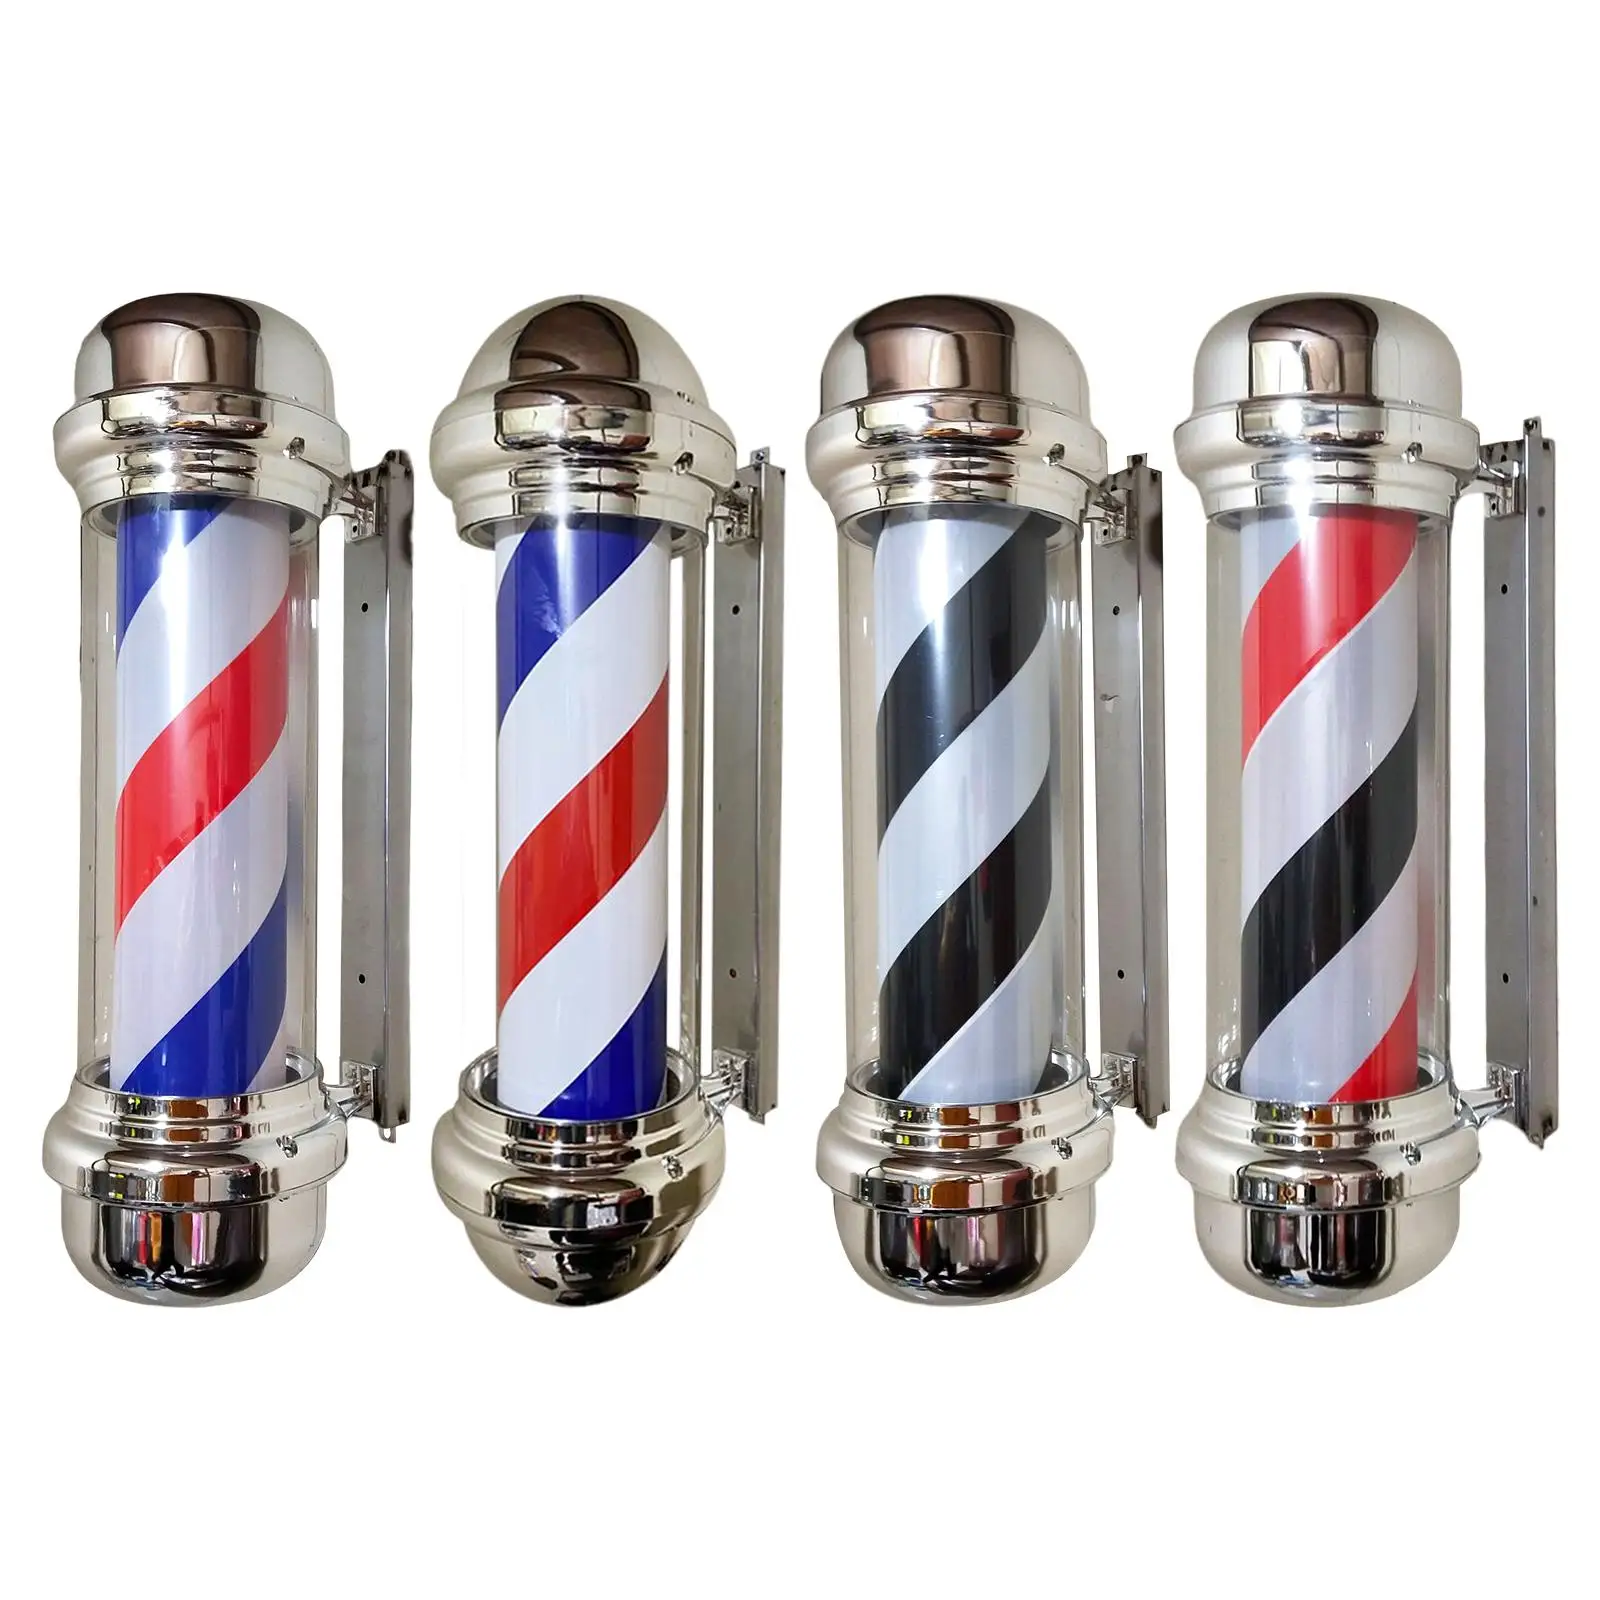 Barber Pole Light 23'' LED Strips Wall Mount Lamp Save Energy Waterproof Classic Barber Shop Rotating Light for Outdoor